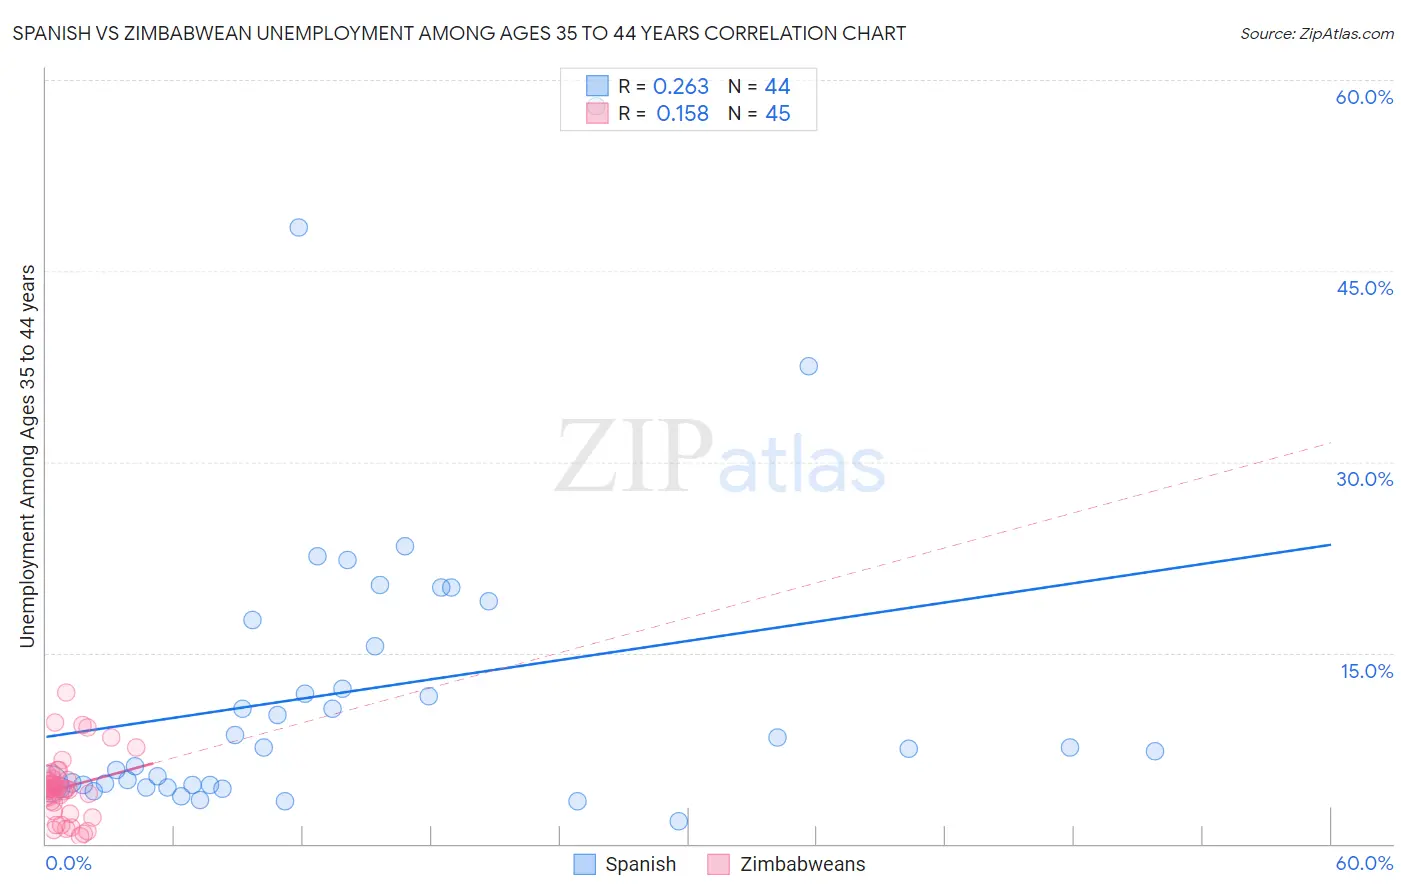 Spanish vs Zimbabwean Unemployment Among Ages 35 to 44 years